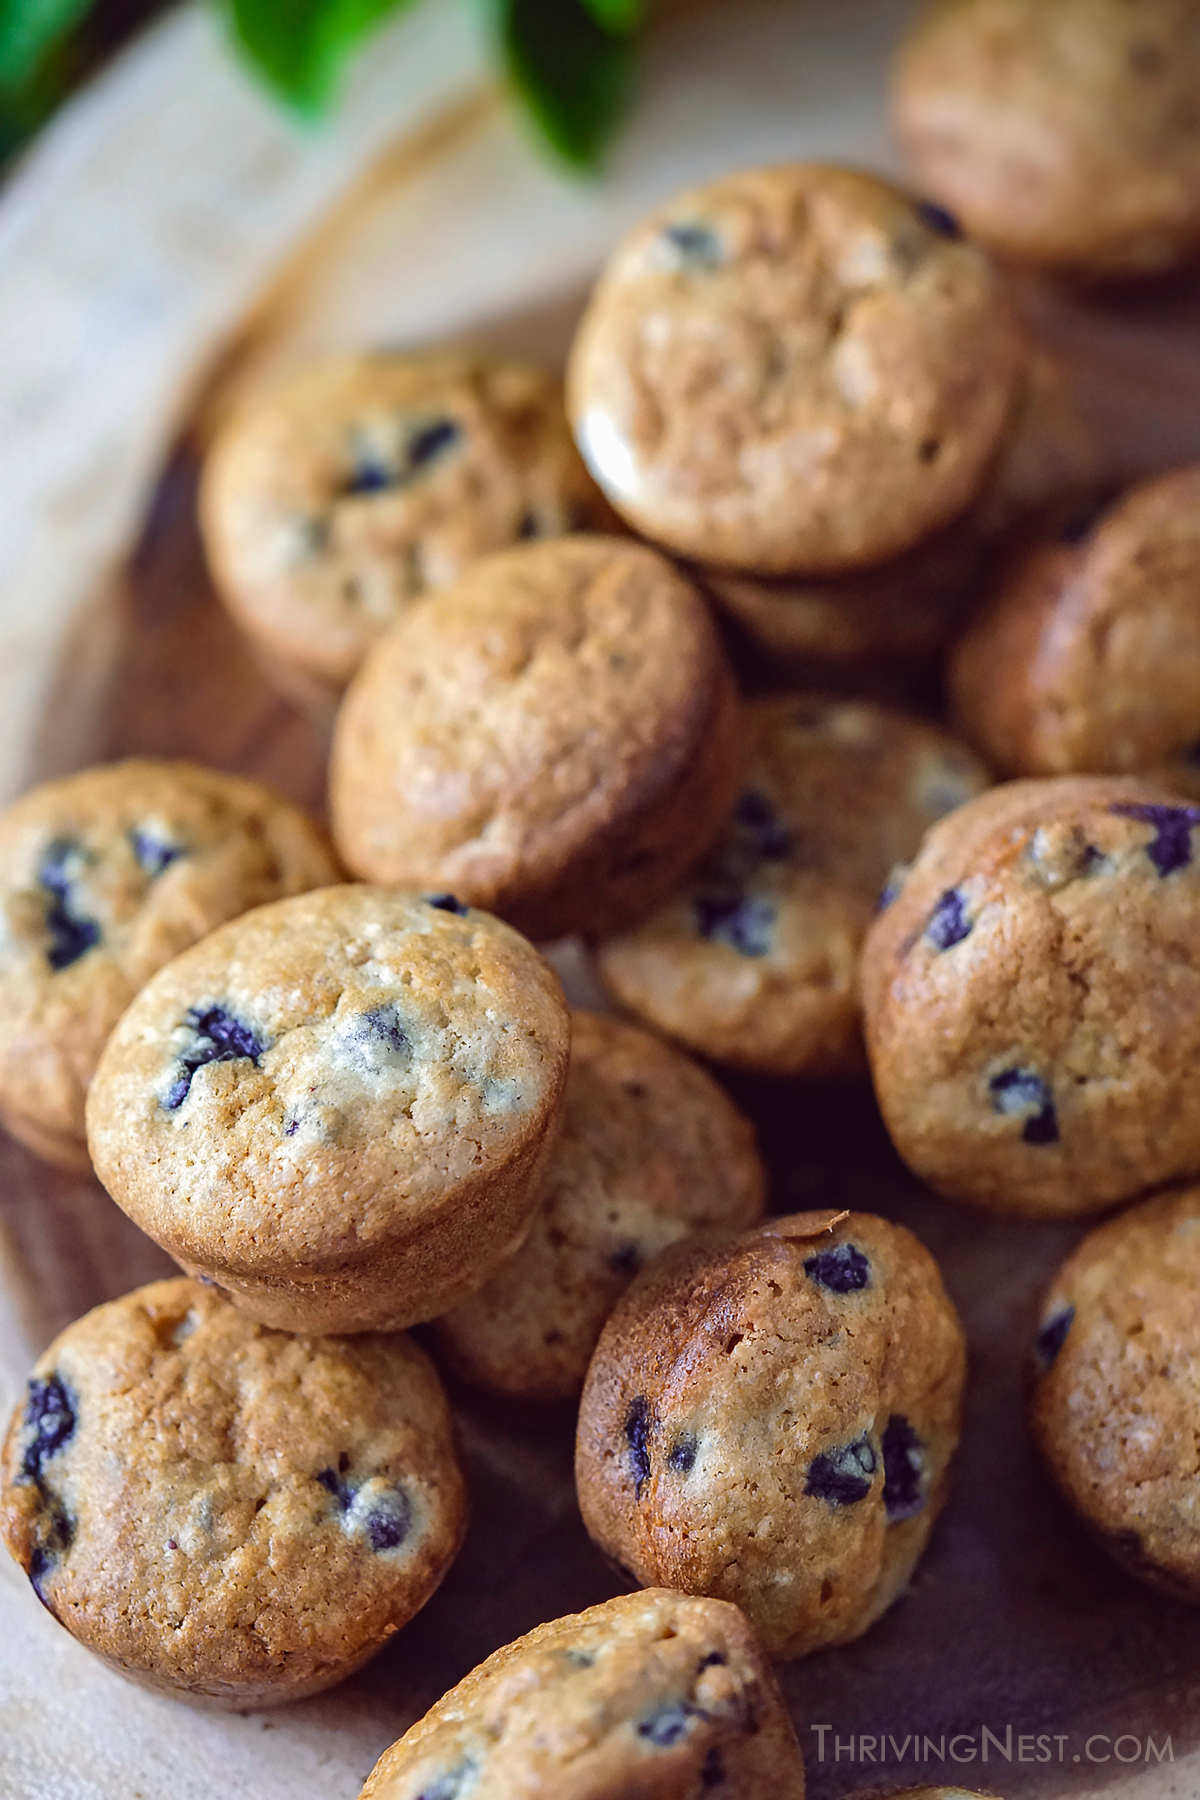 Mini muffins for baby with blueberry and healthier ingredients easy recipe that can be adapted to be gluten free or dairy free.